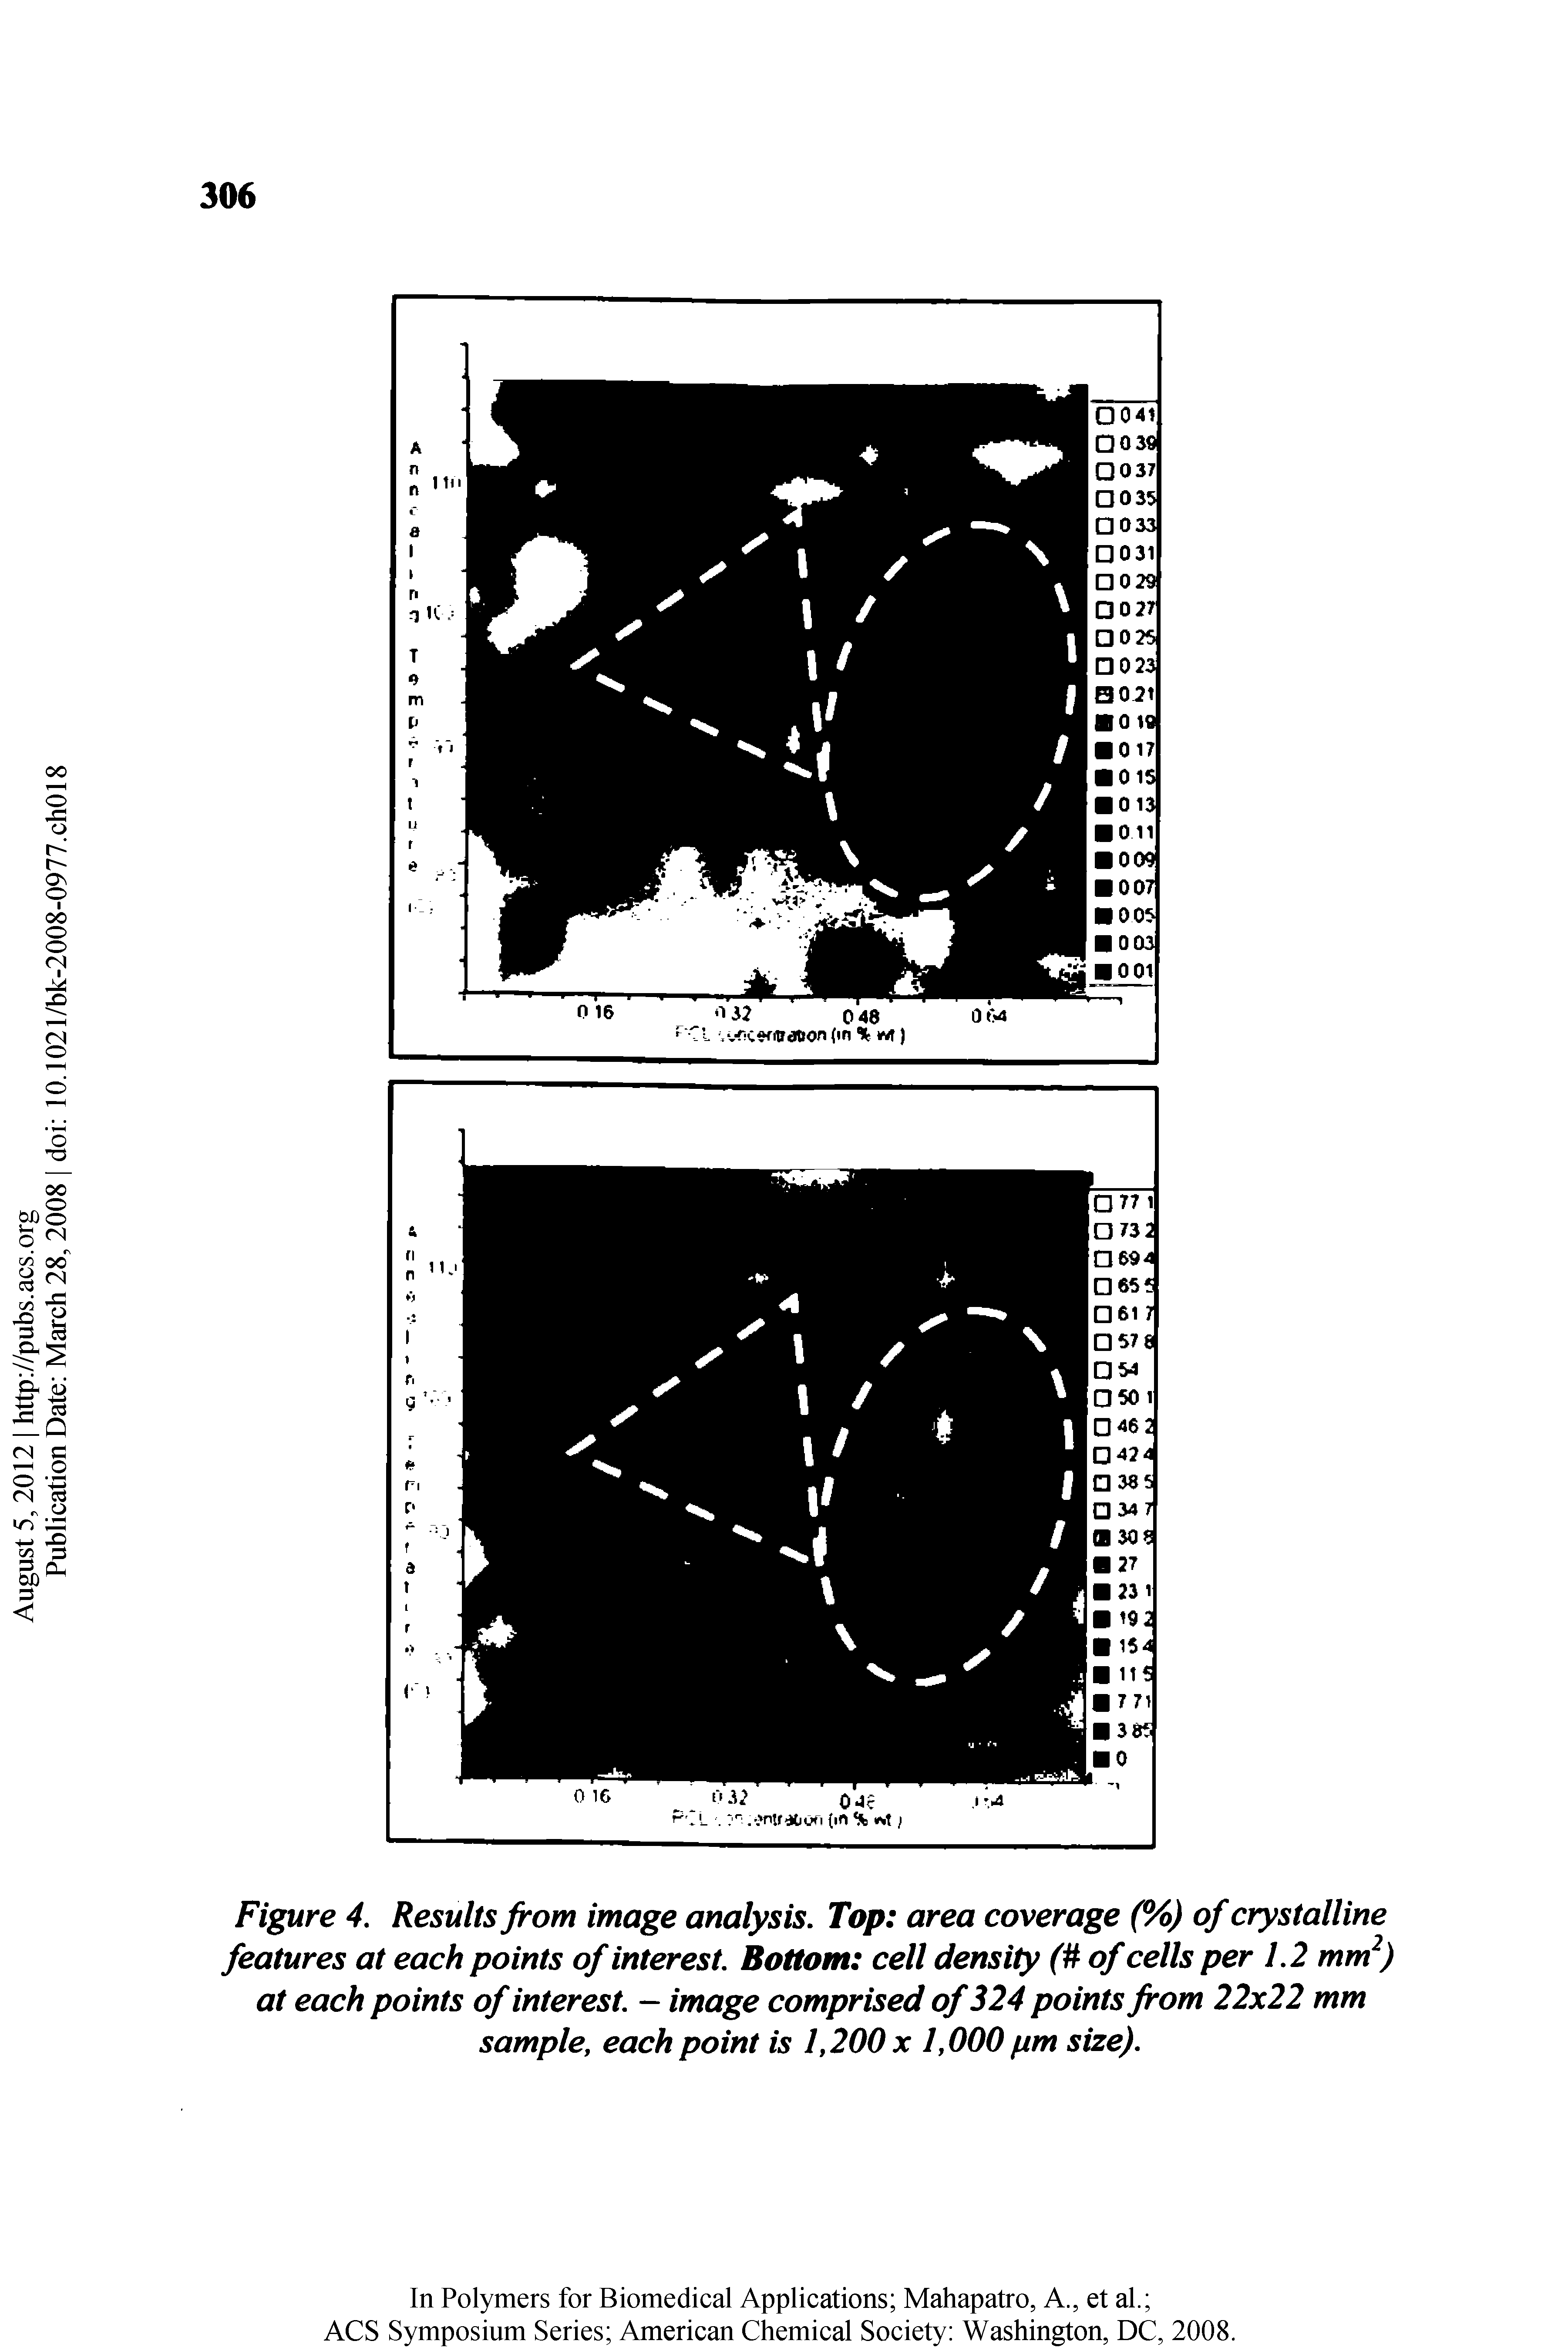 Figure 4, Results from image analysis. Top area coverage (%) of crystalline features at each points of interest. Bottom cell density ( of cells per 1.2 mm ) at each points of interest. — image comprised of324 points from 22x22 mm sample, each point is 1,200 x 1,000 pm size).